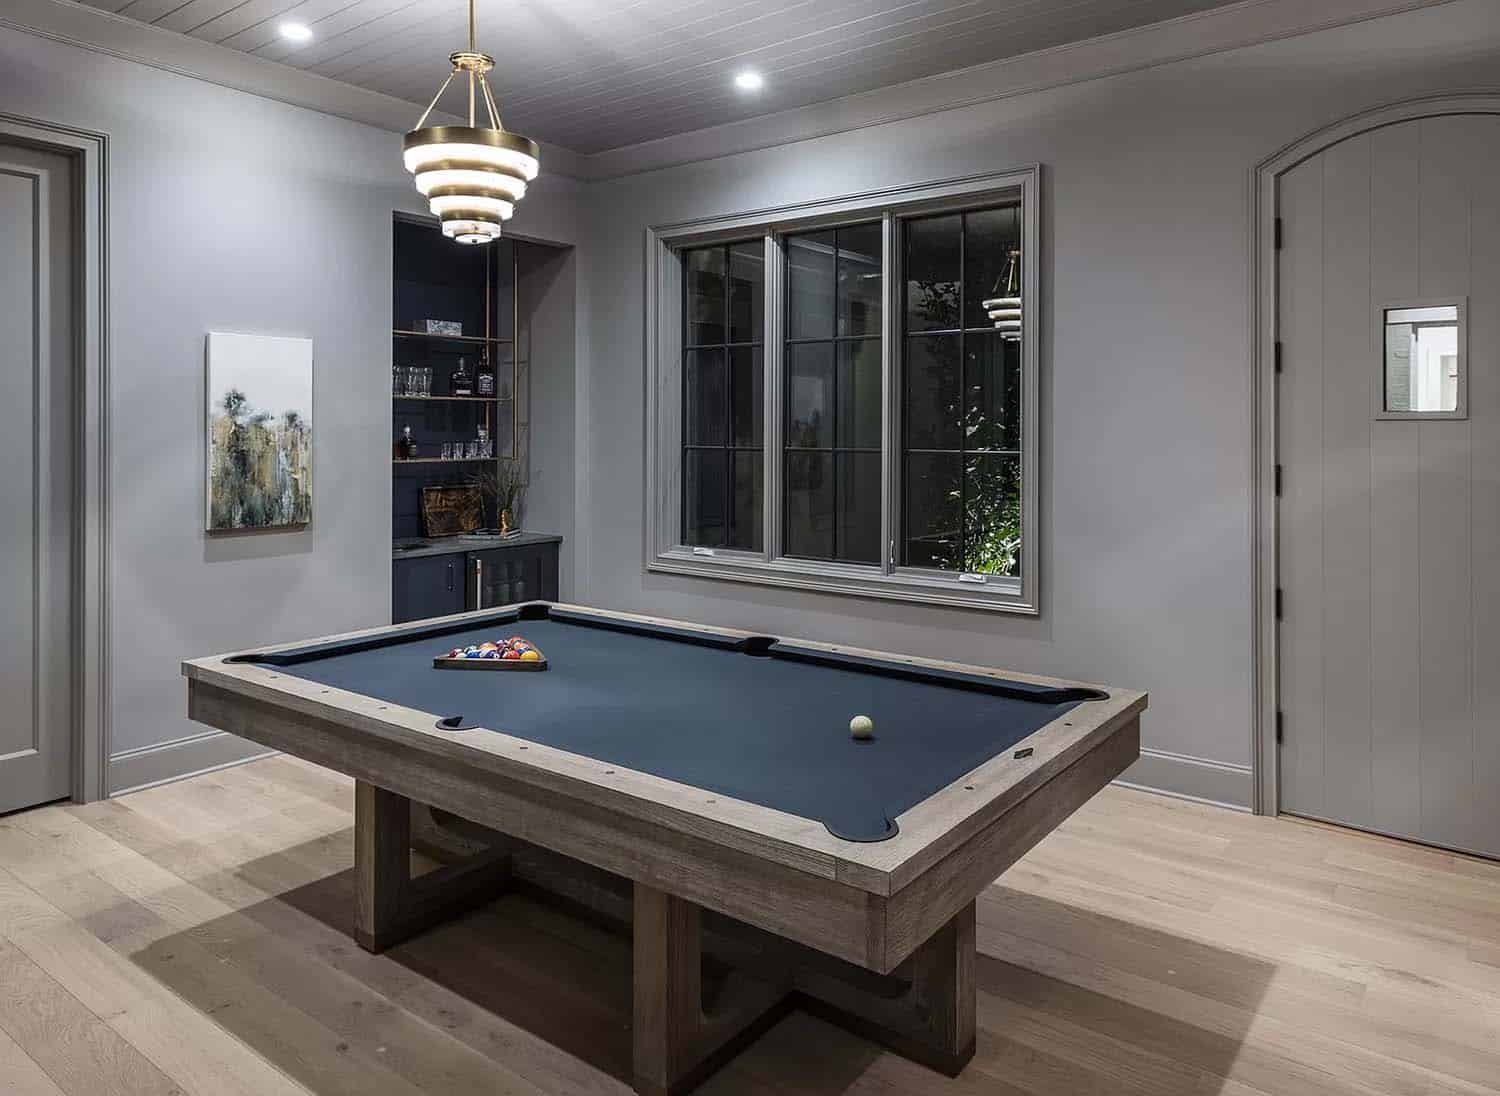 contemporary entertainment room with a pool table at dusk